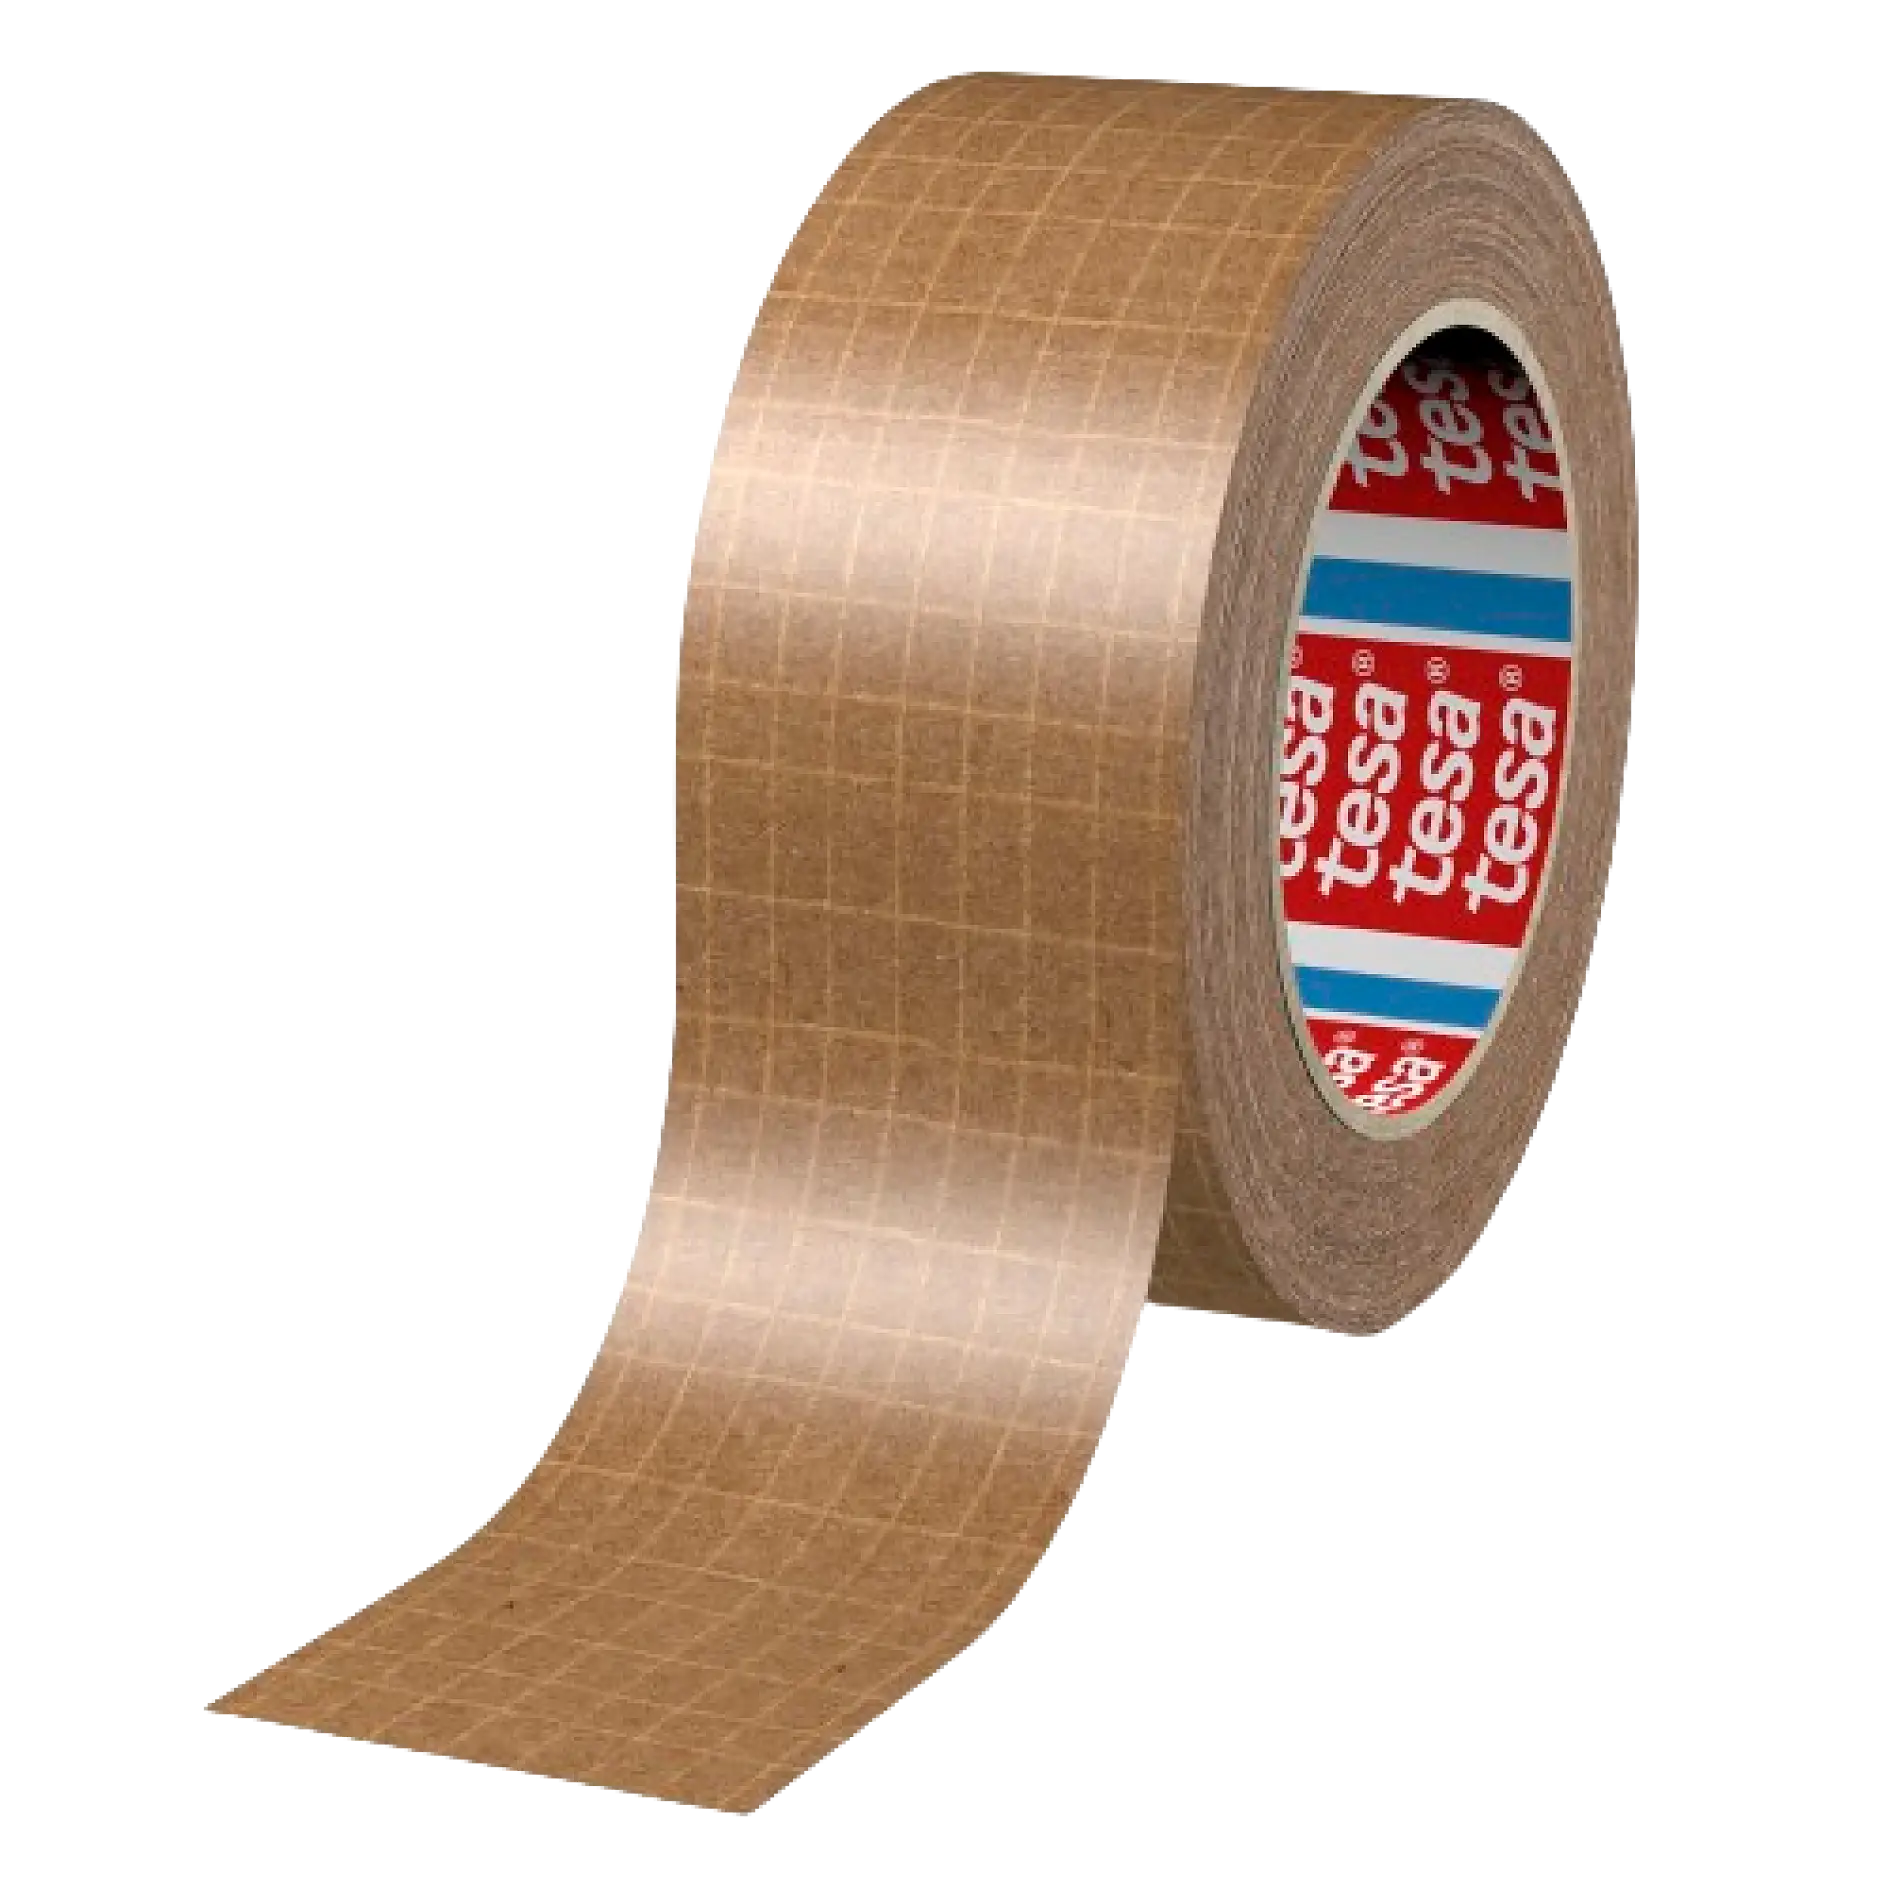 tesa-60013-self-adhesive-reinforced-paper-packaging-tape-chamois-600130000000-pr-cms-1-removebg-preview-1